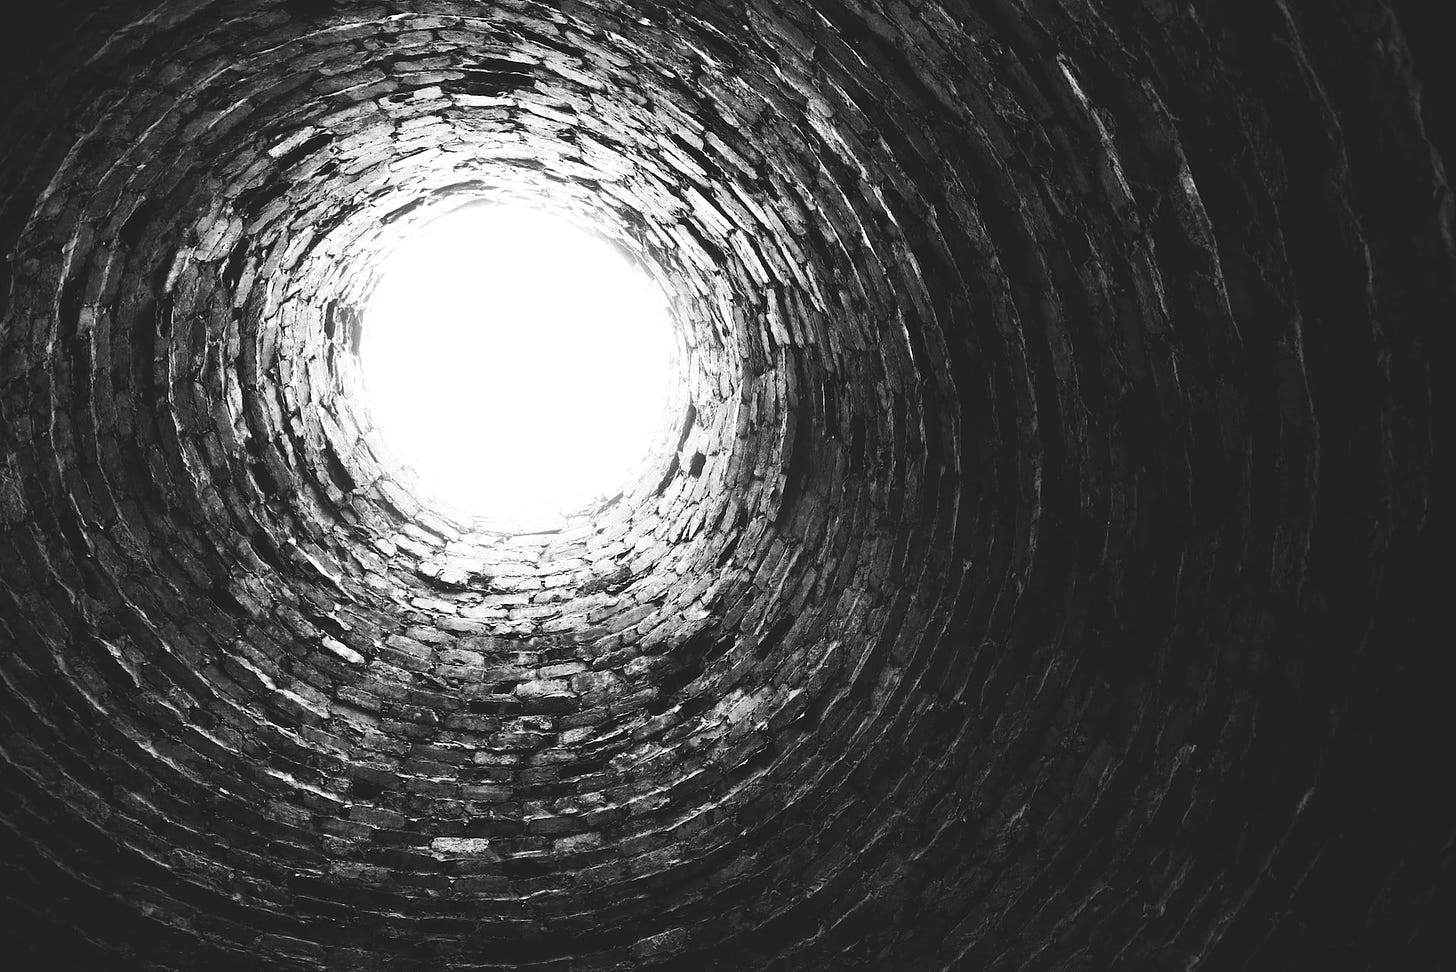 A black and white photograph looking upwards at the round circle of white sky-light from inside a brick-lined well.